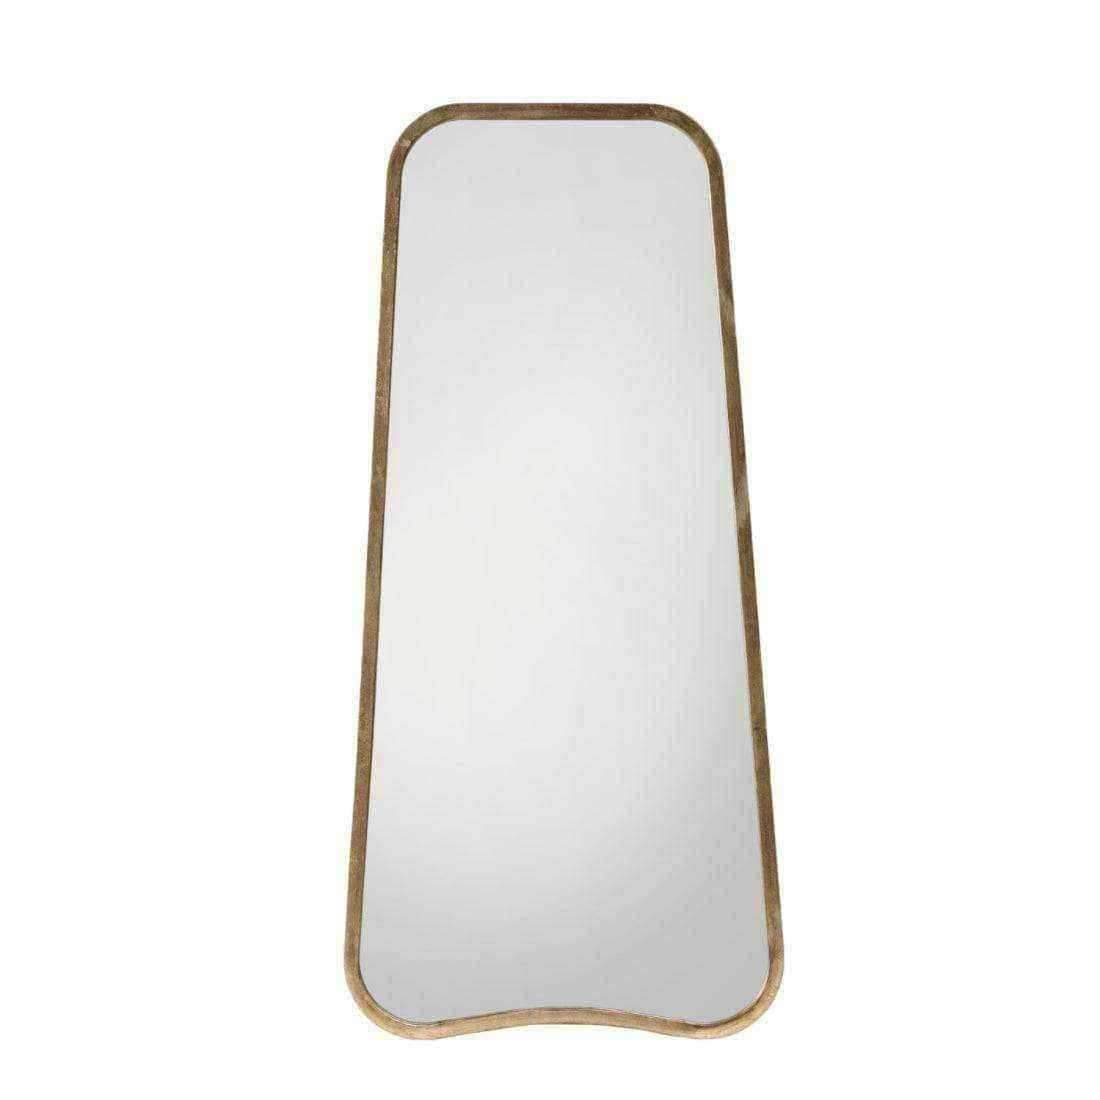 Gold Flowing Curved Corner Mirror - The Farthing